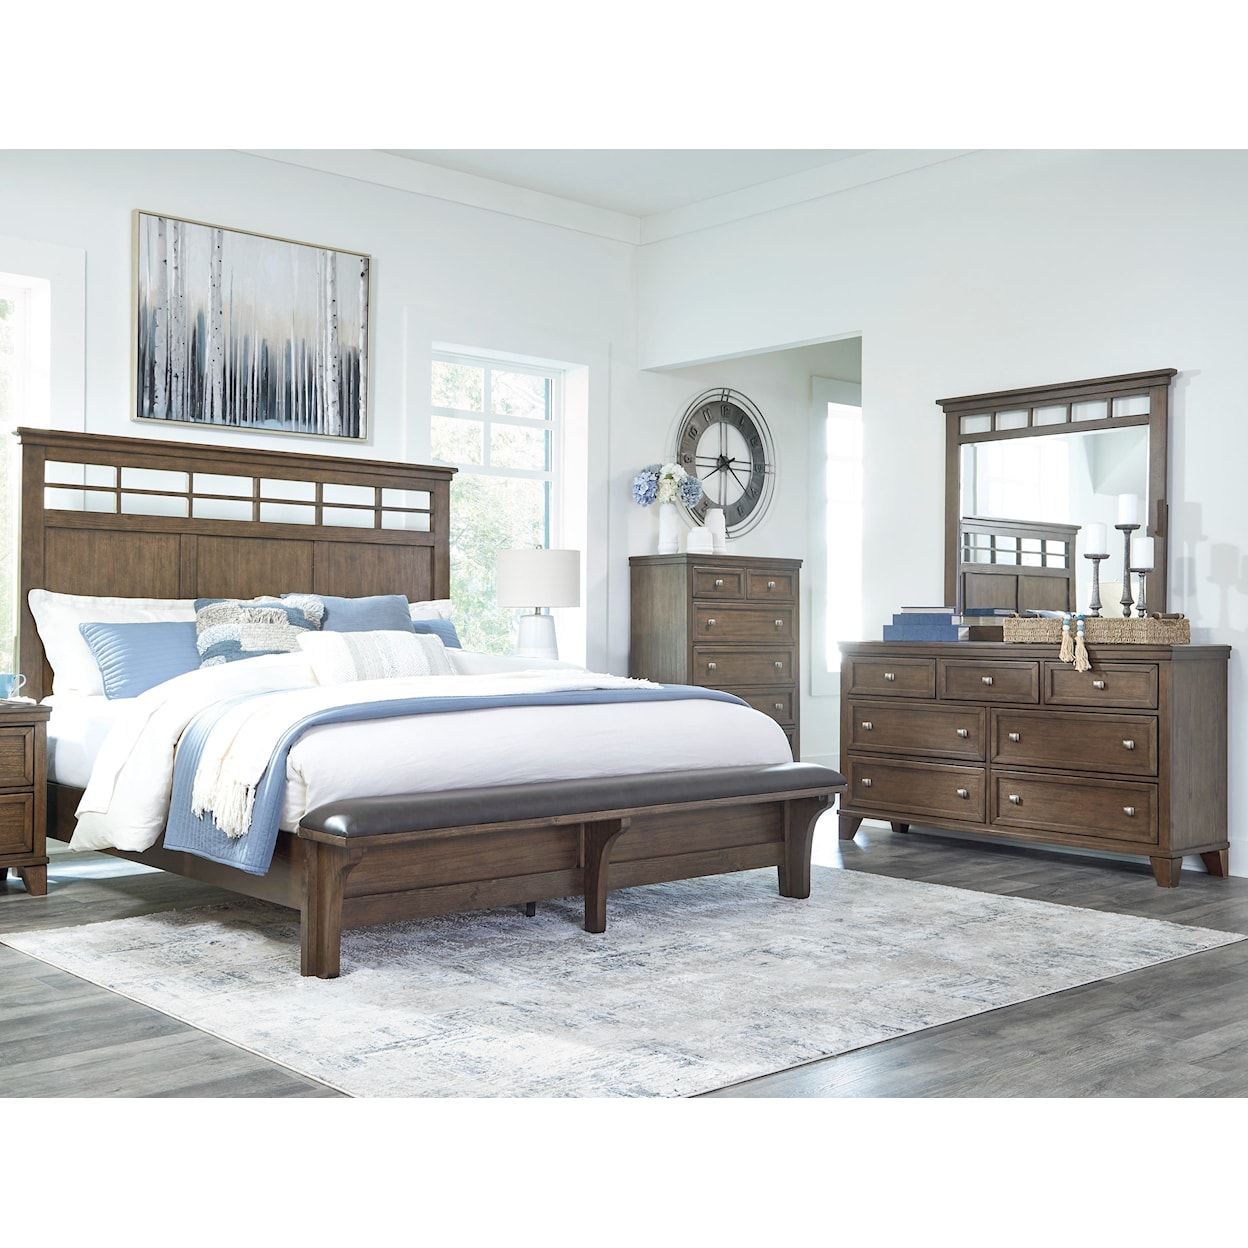 Ashley Furniture Benchcraft Shawbeck Queen Bedroom Group